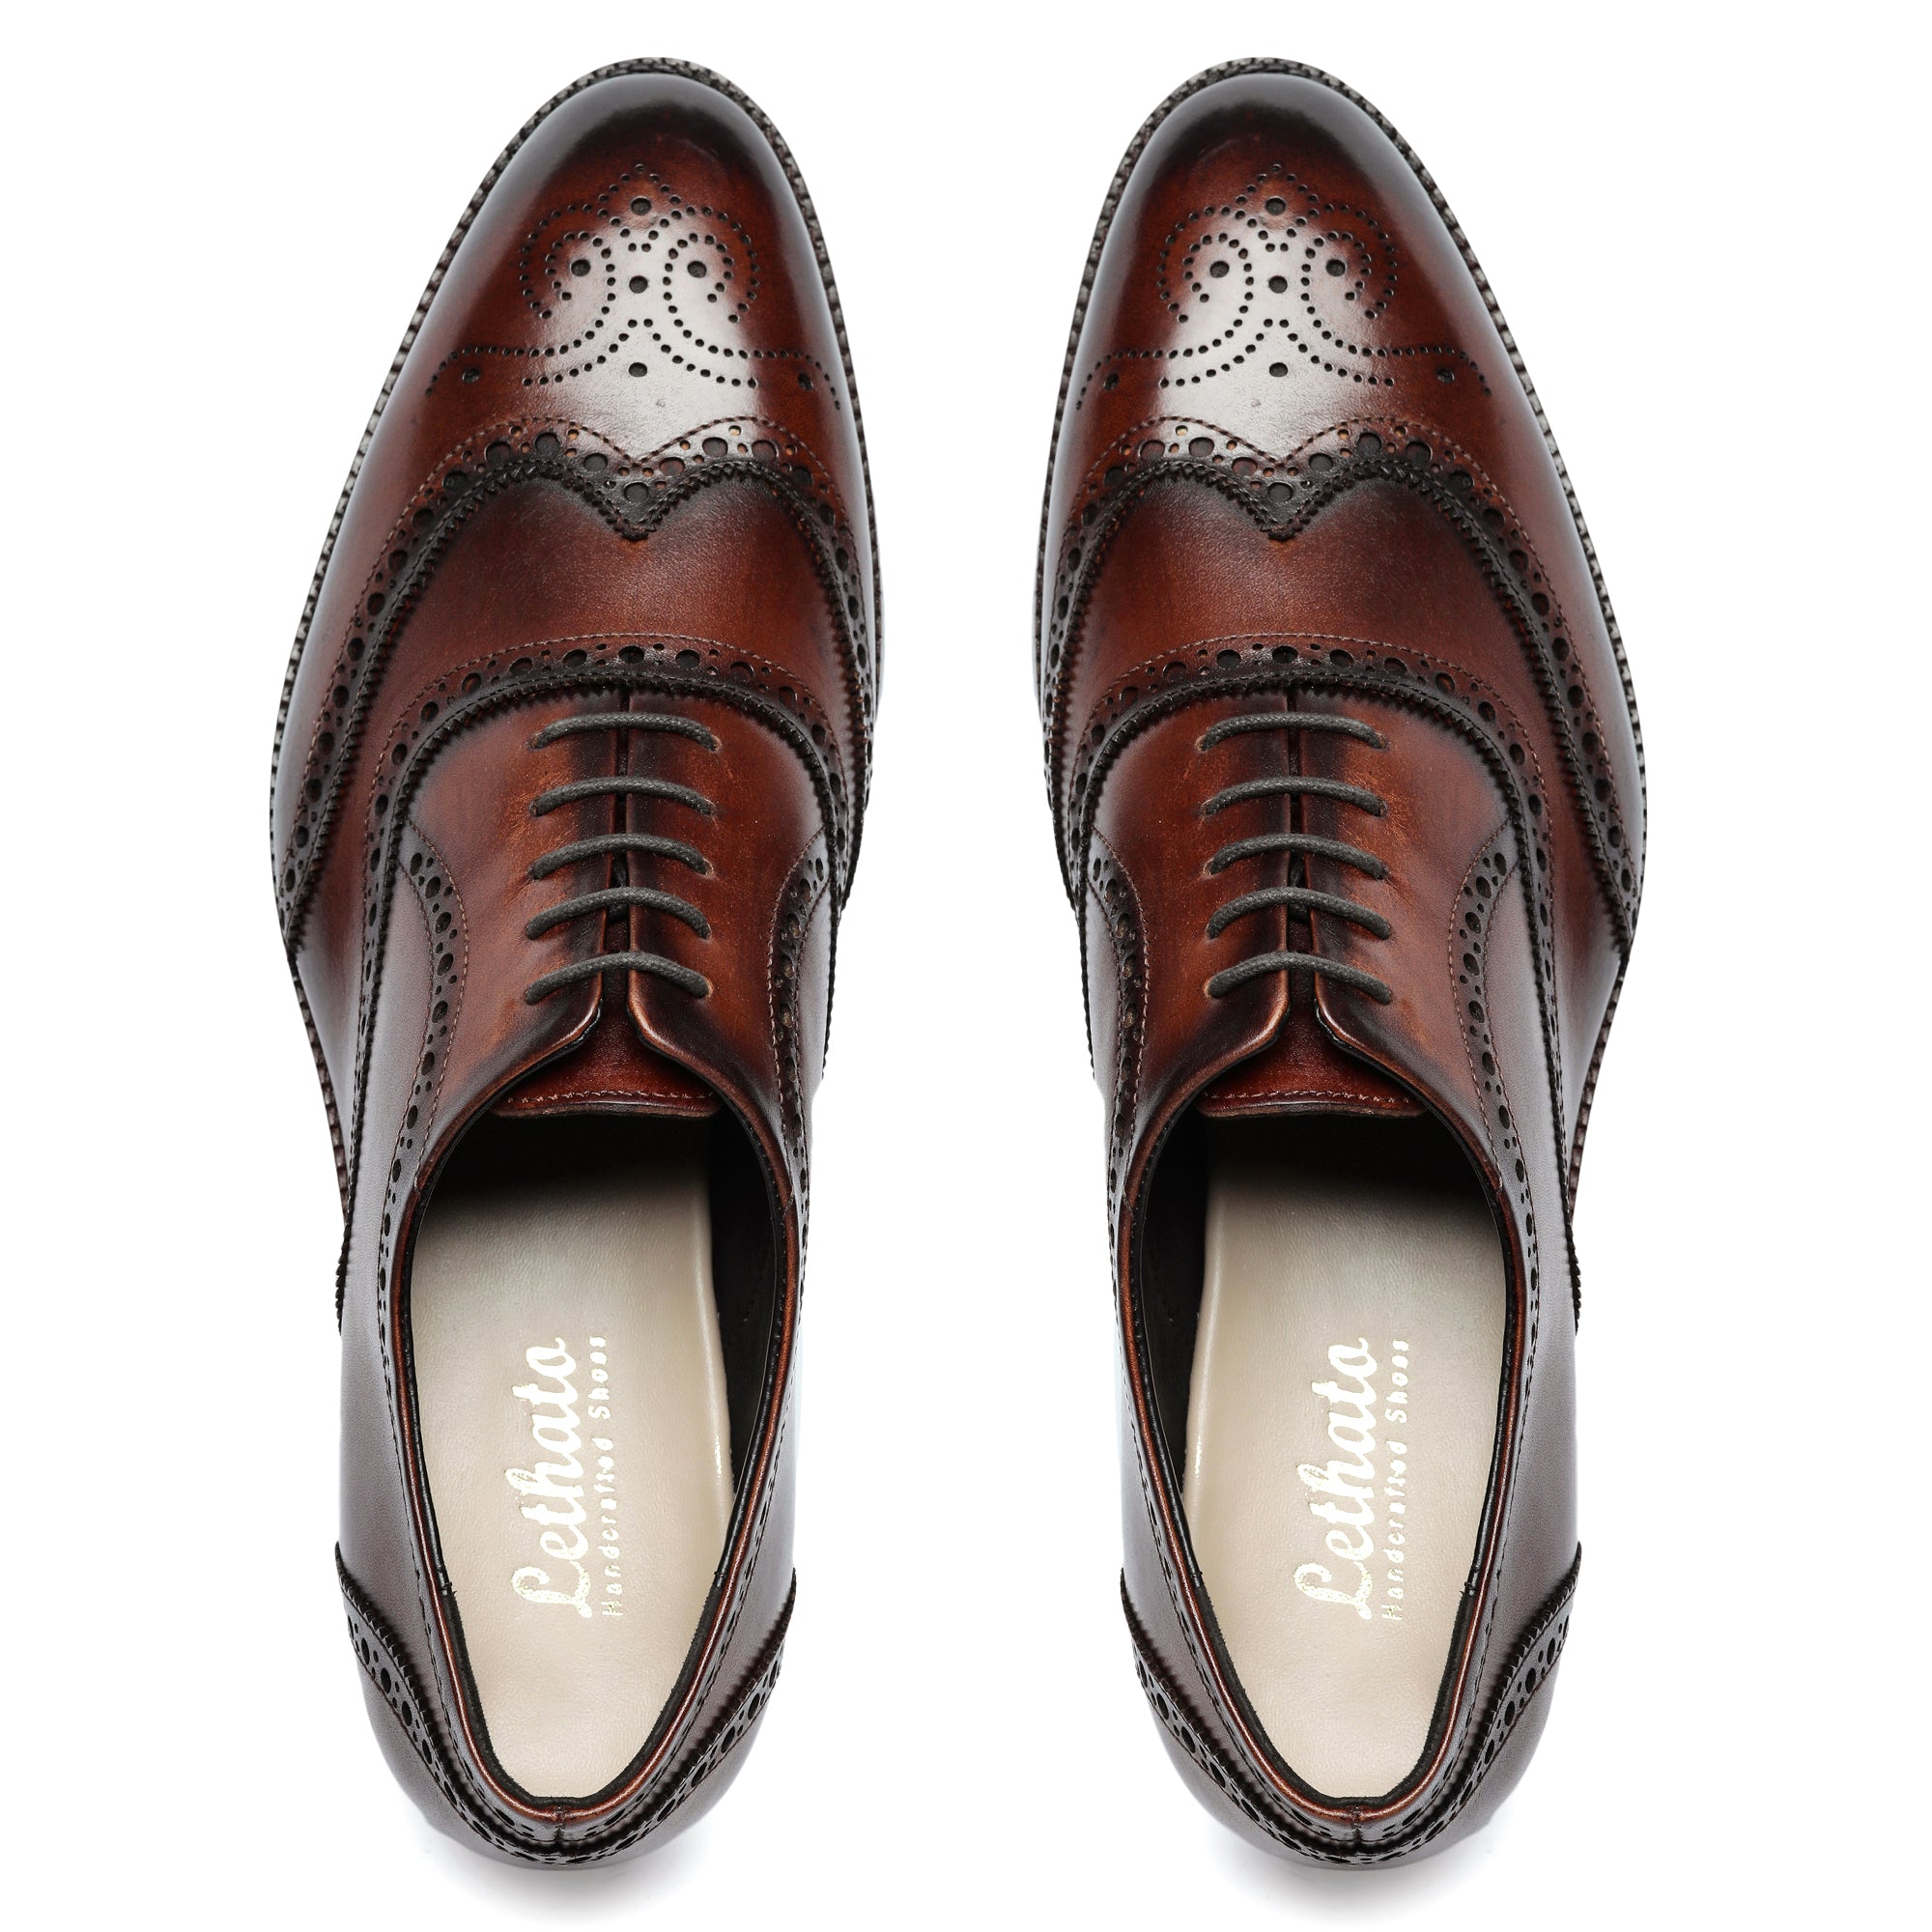 1966 Luis Gonzalo Leather Wingtip Lace-Up Oxford Dress Shoes Brown